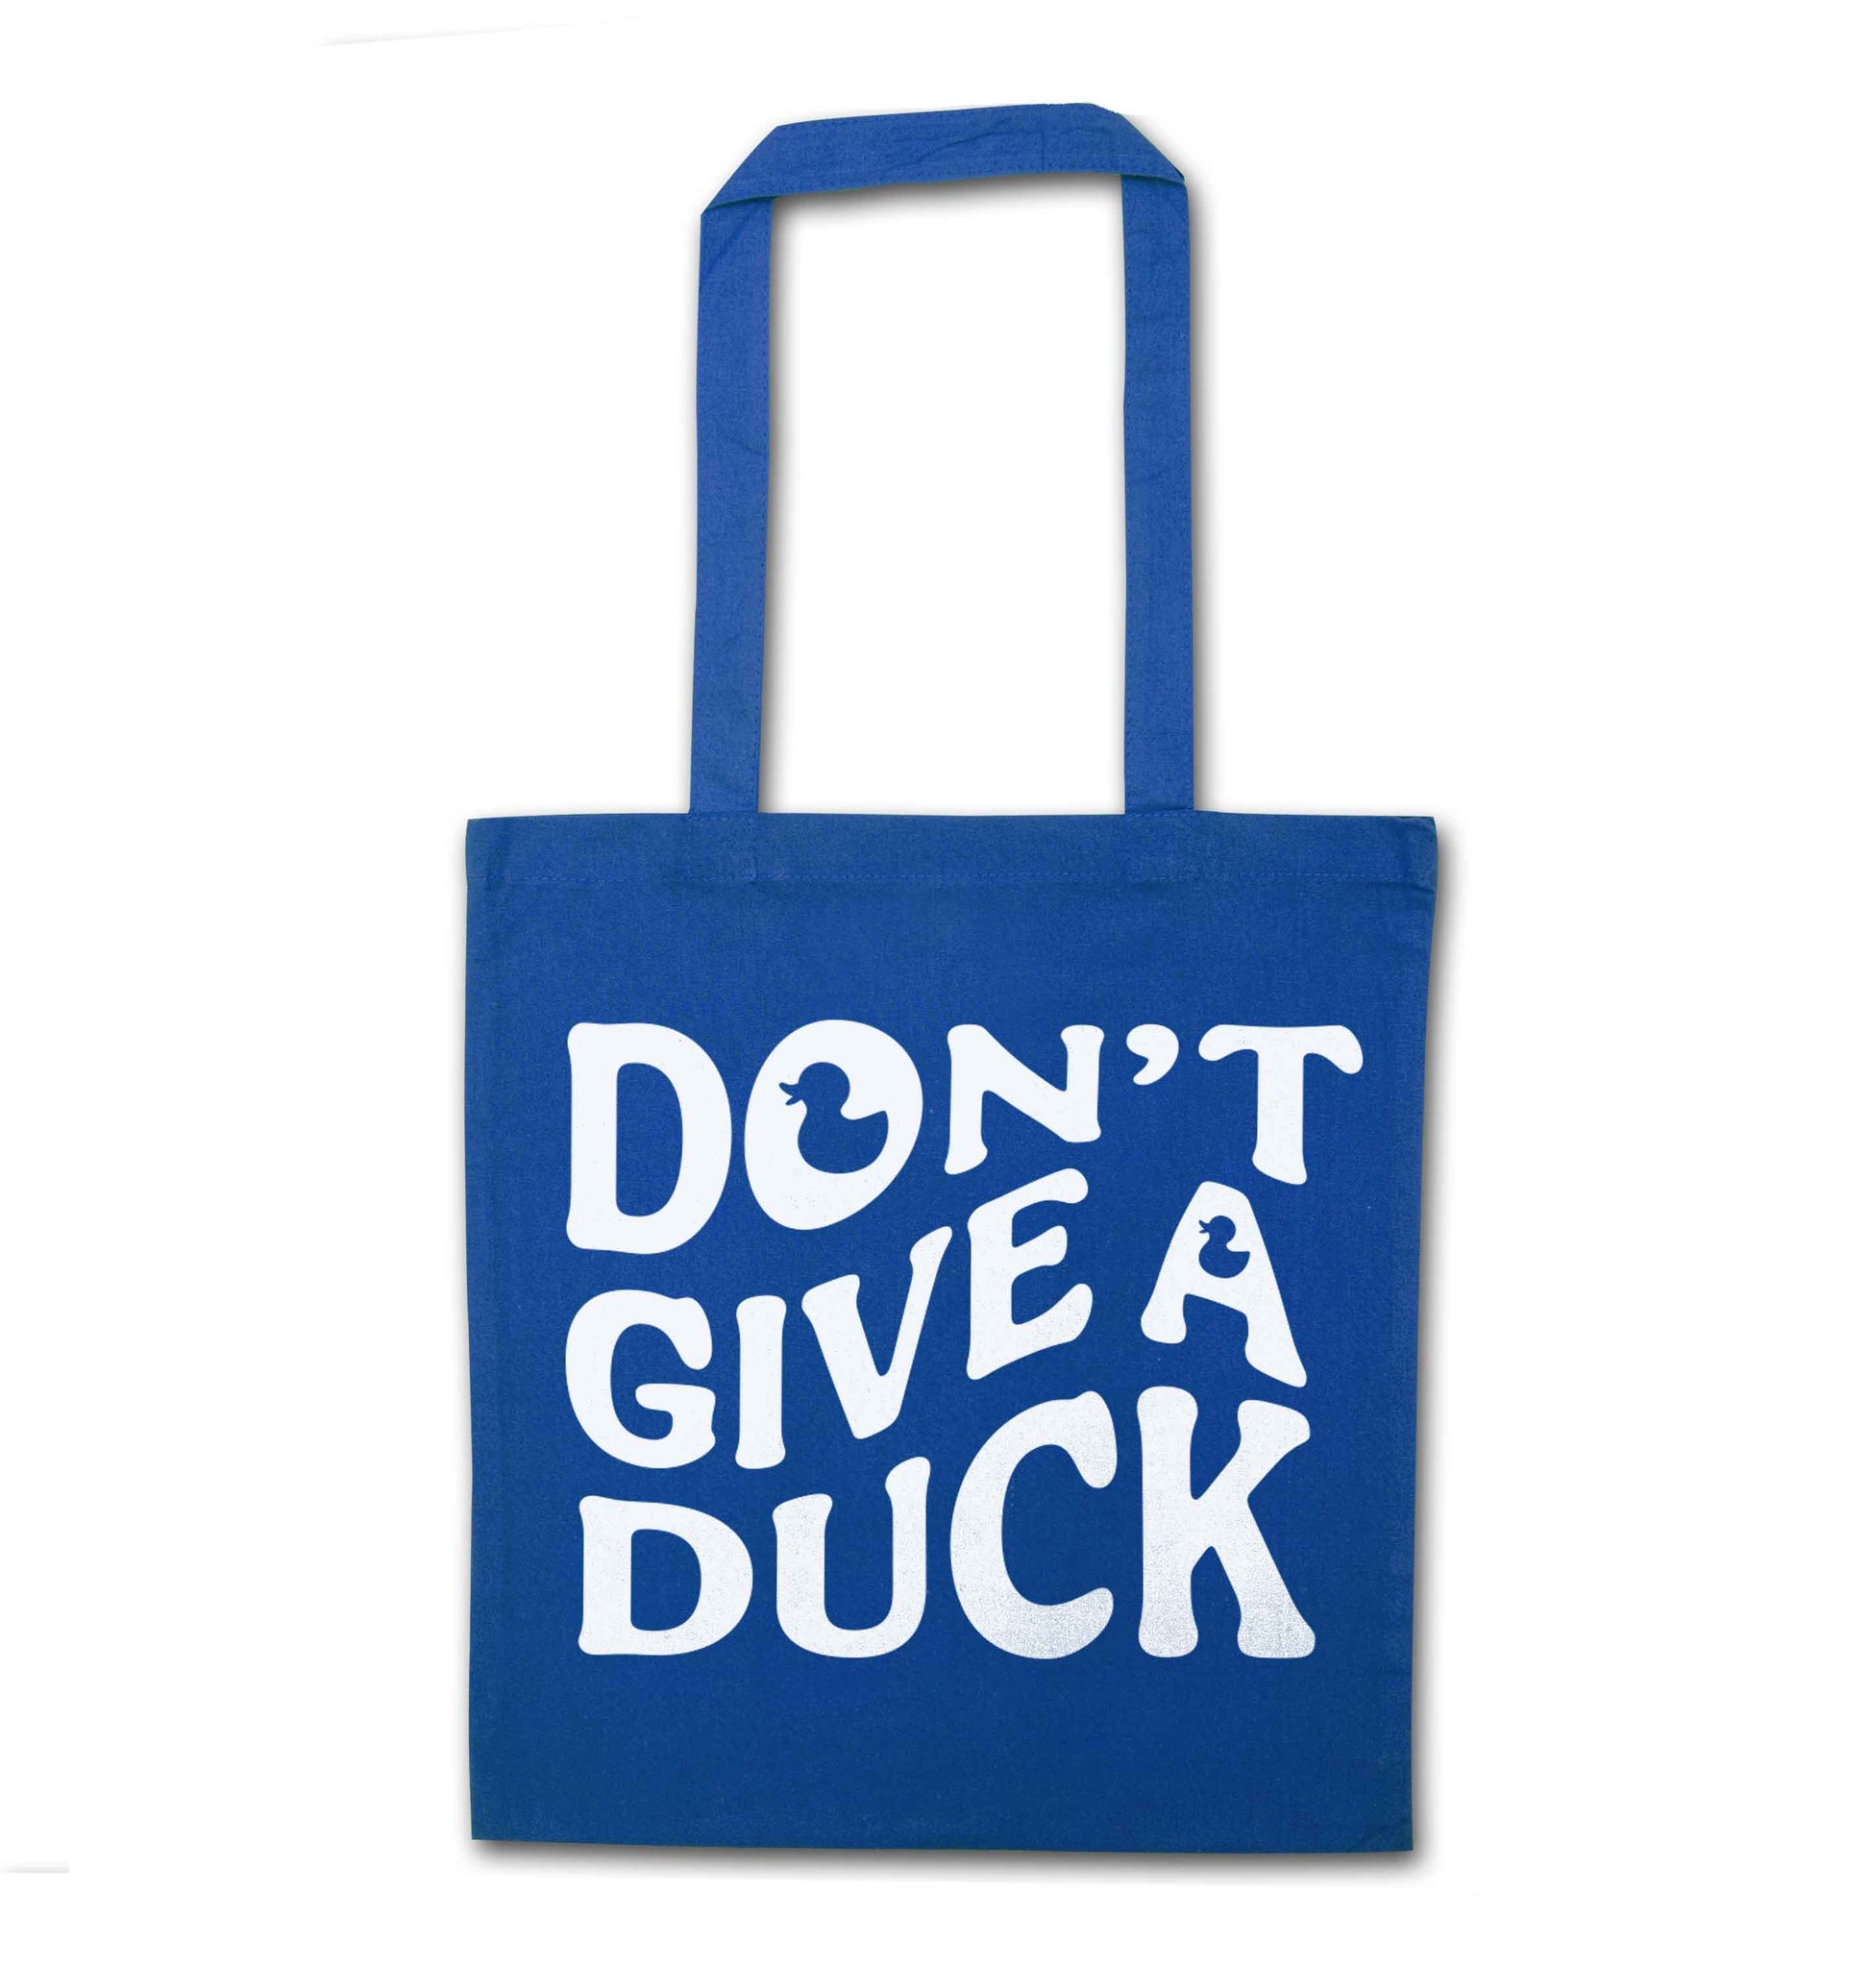 Don't give a duck blue tote bag